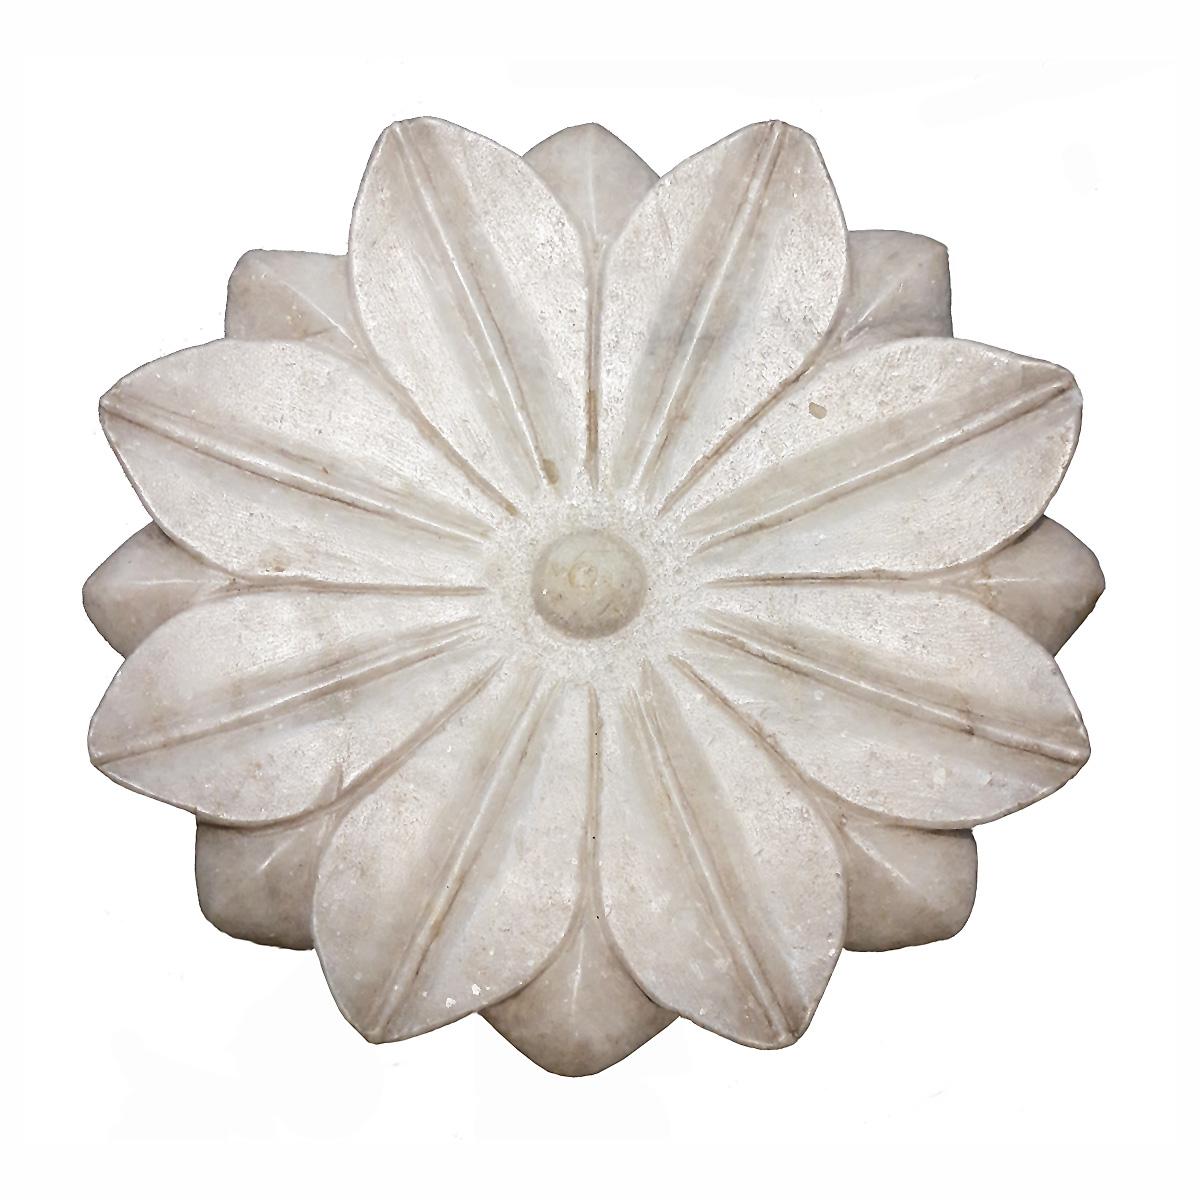 Indian Marble Flower Plate / Vide Poche from India, Mid-20th Century For Sale